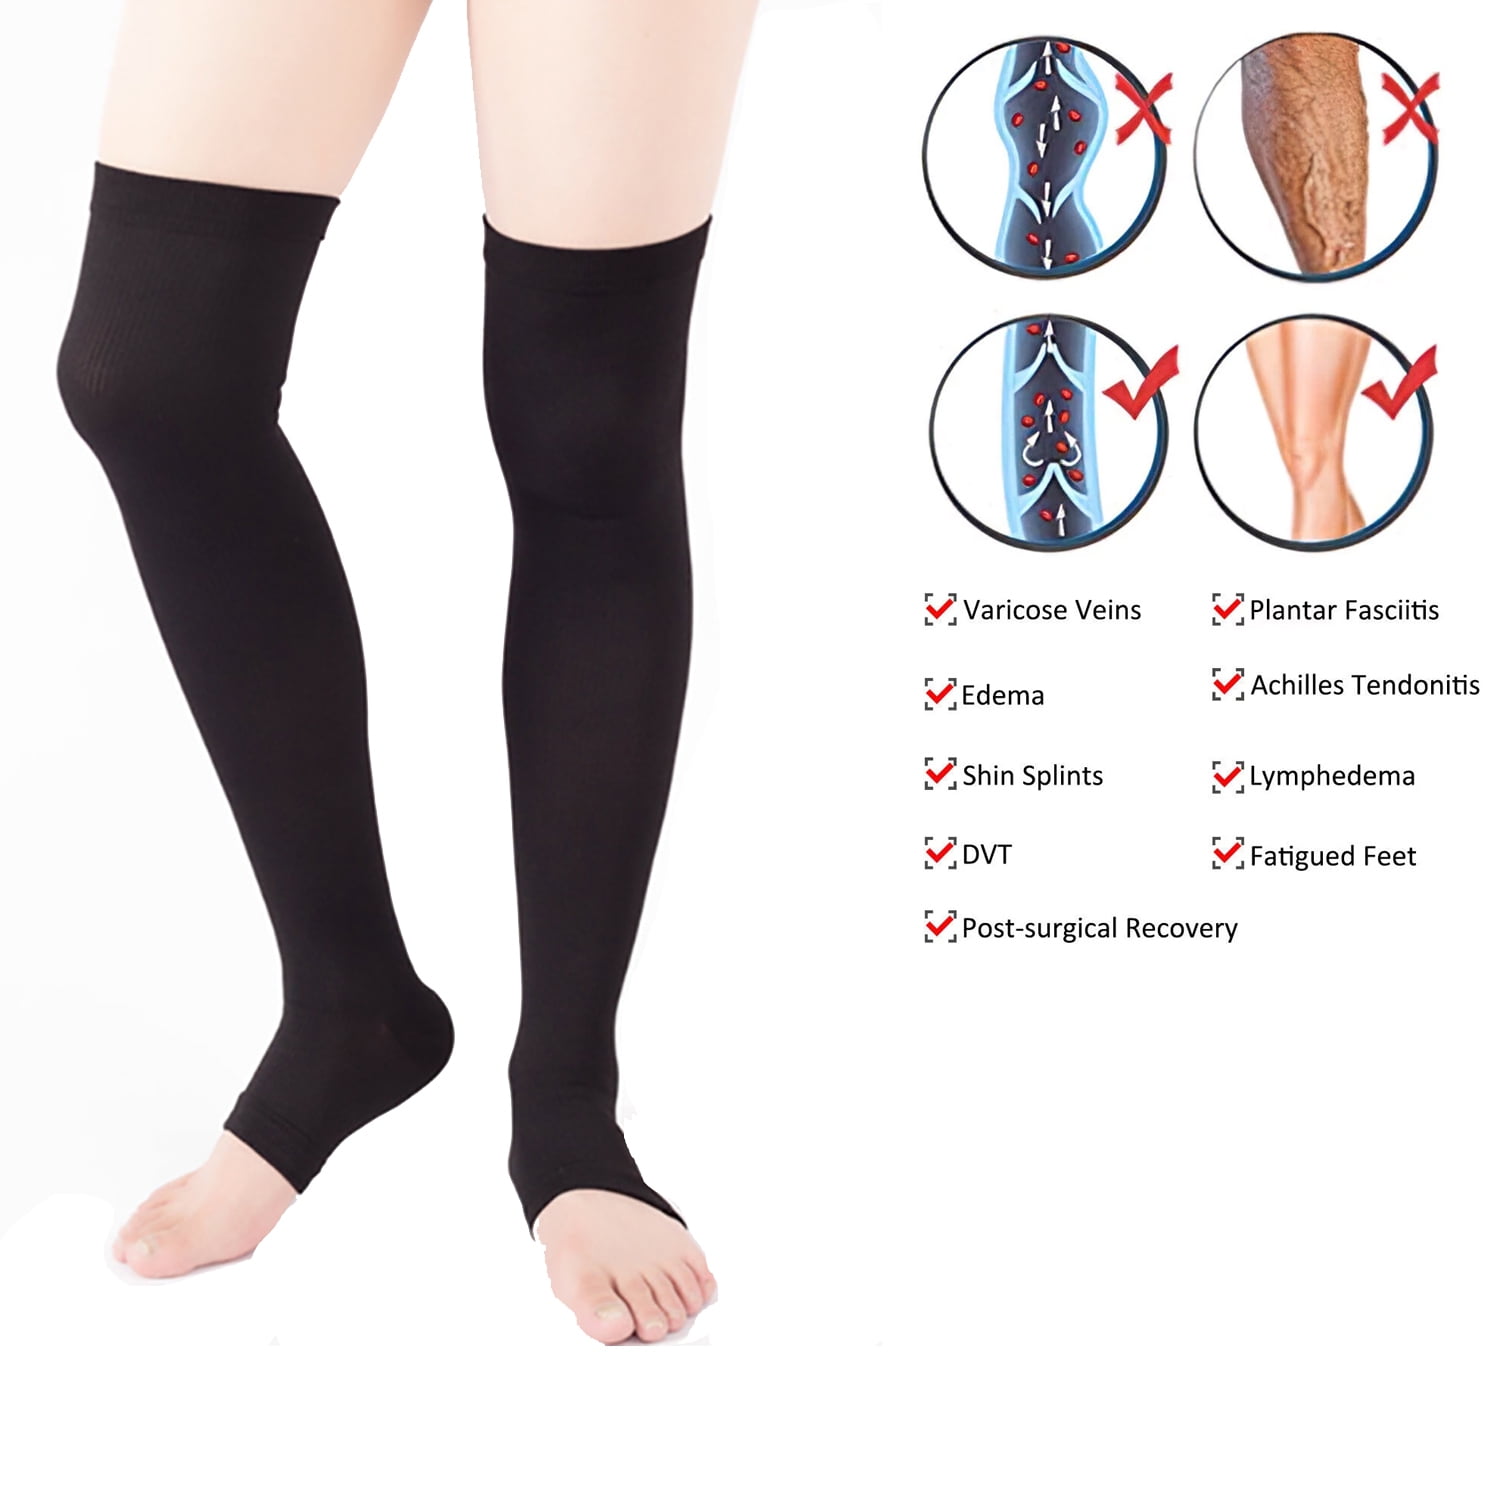 1 Pair High Compression Socks Leg Support Stretch Compression Socks Knee  High Stockings Open Toe Socks for Men Women, Anti Fatigue Pain Relief,  Helps